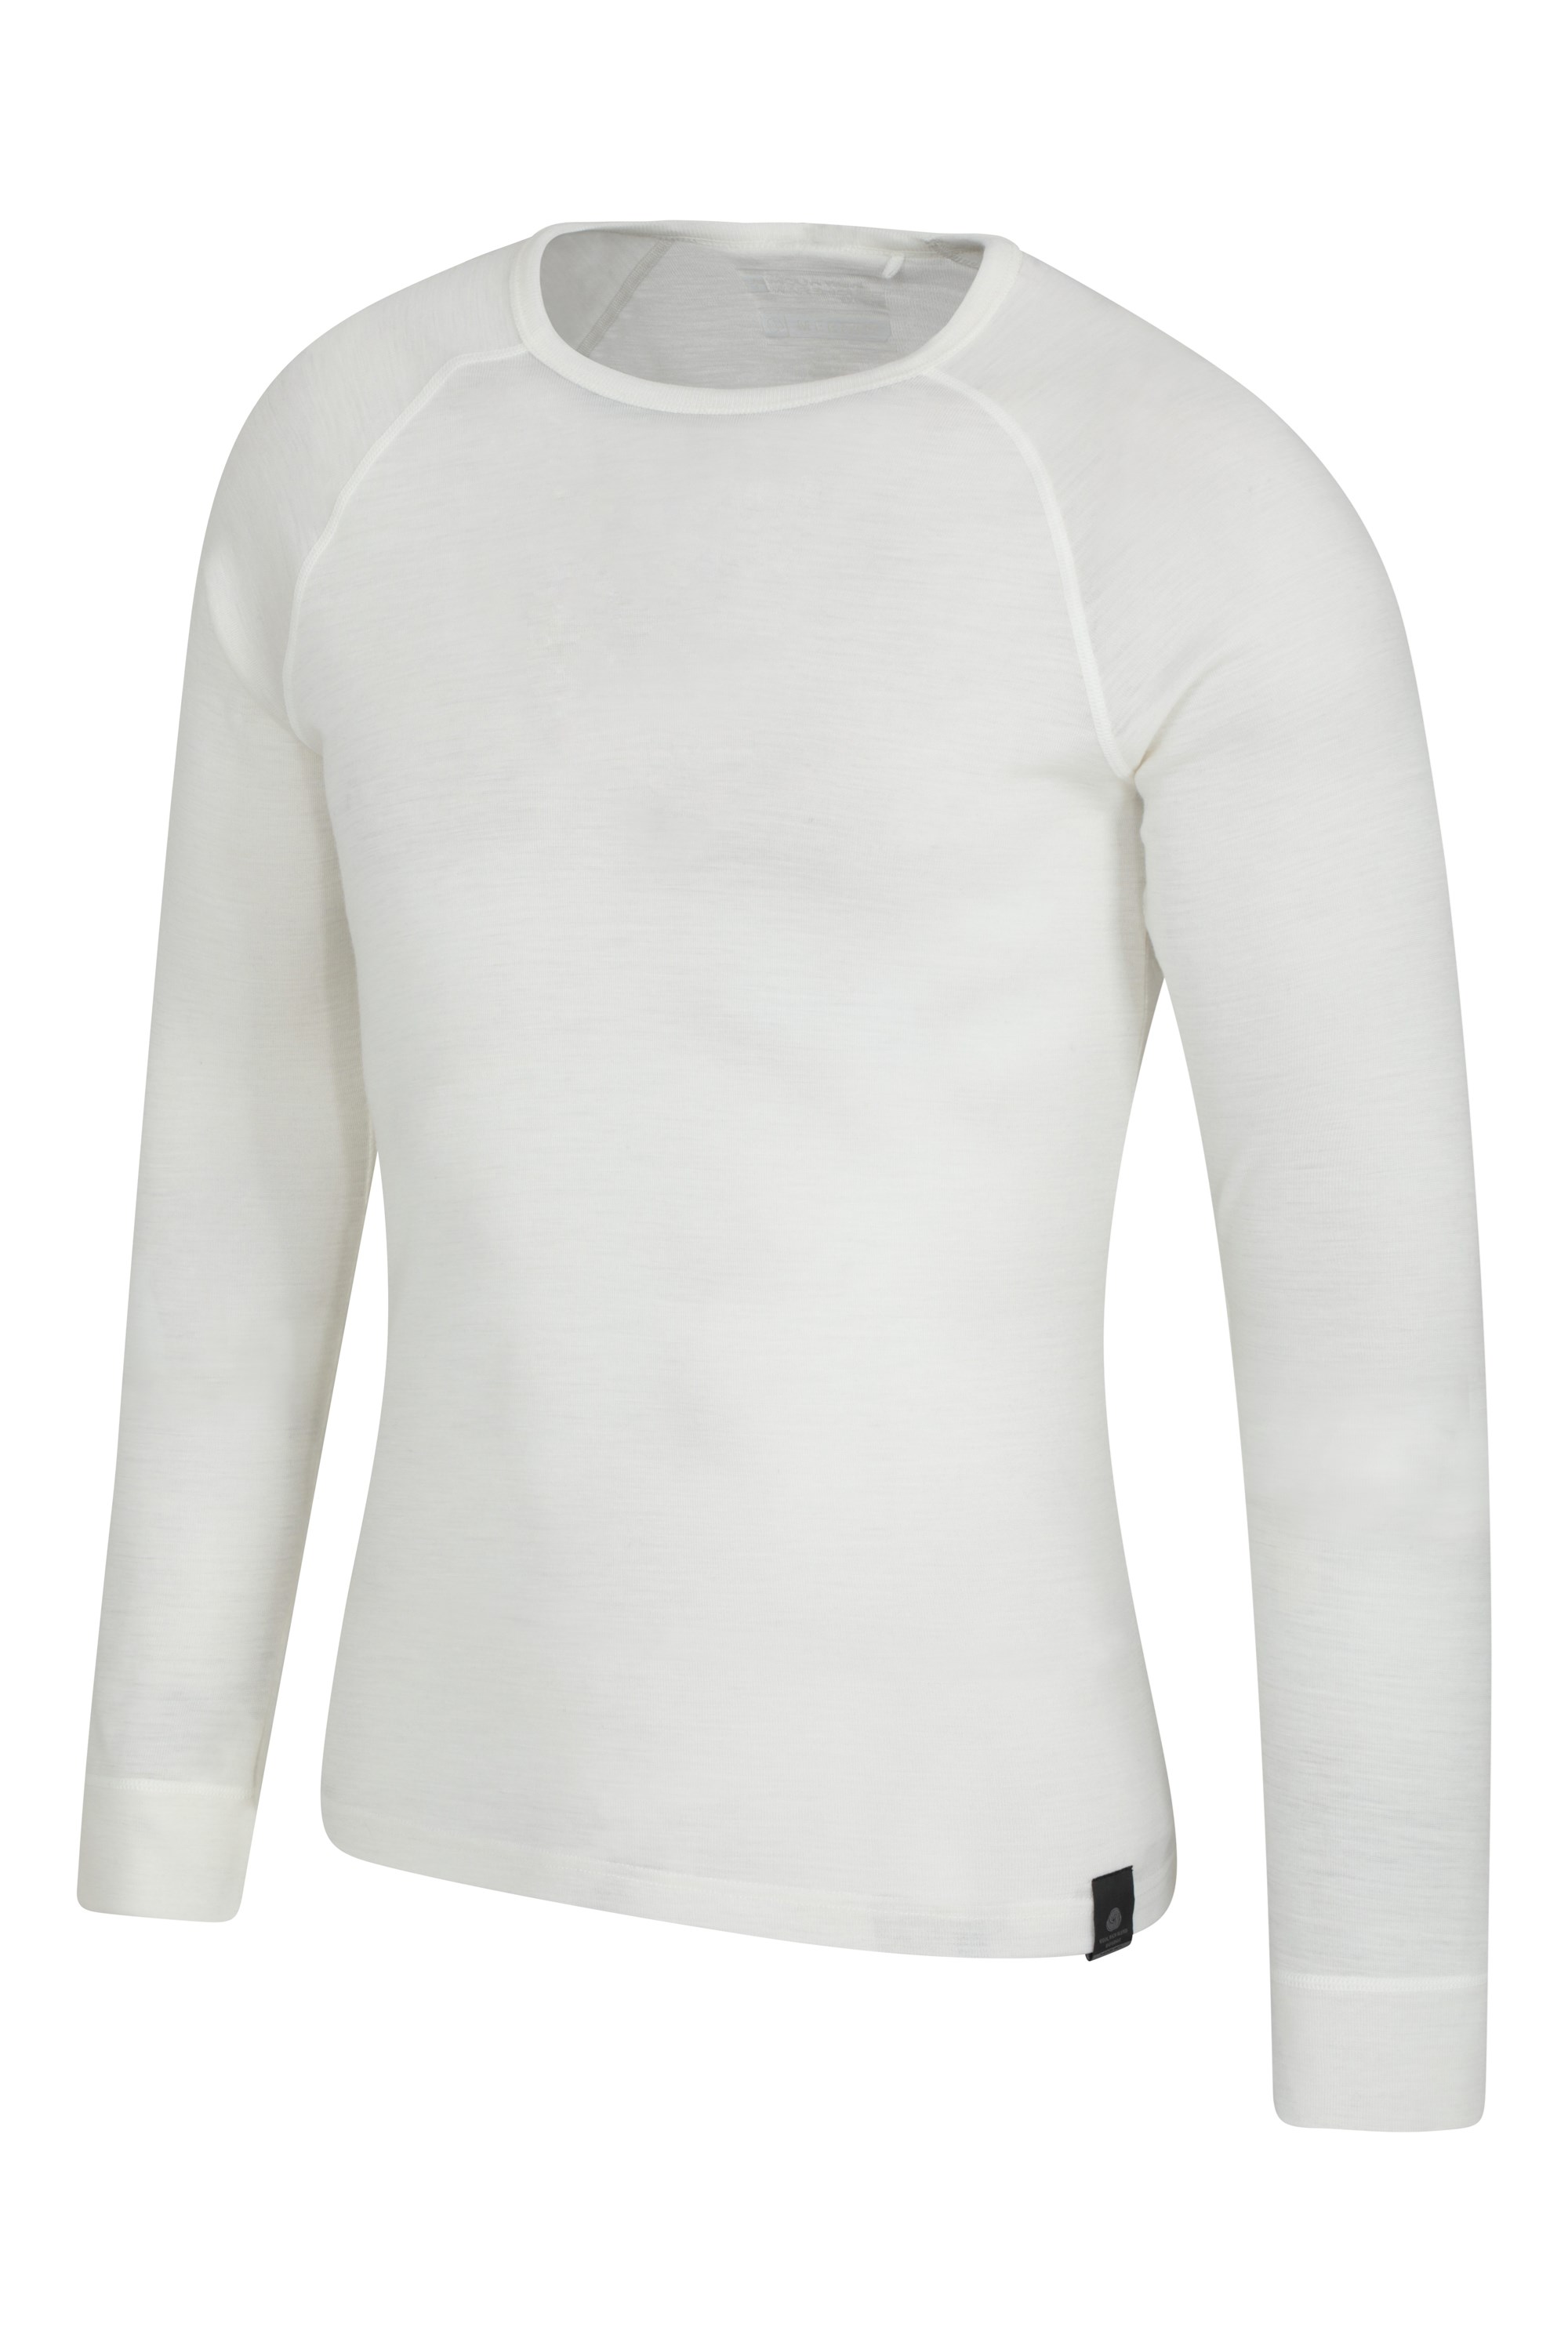 Mountain Warehouse Merino Mens Long Sleeved Top with Round Neck Easy Care